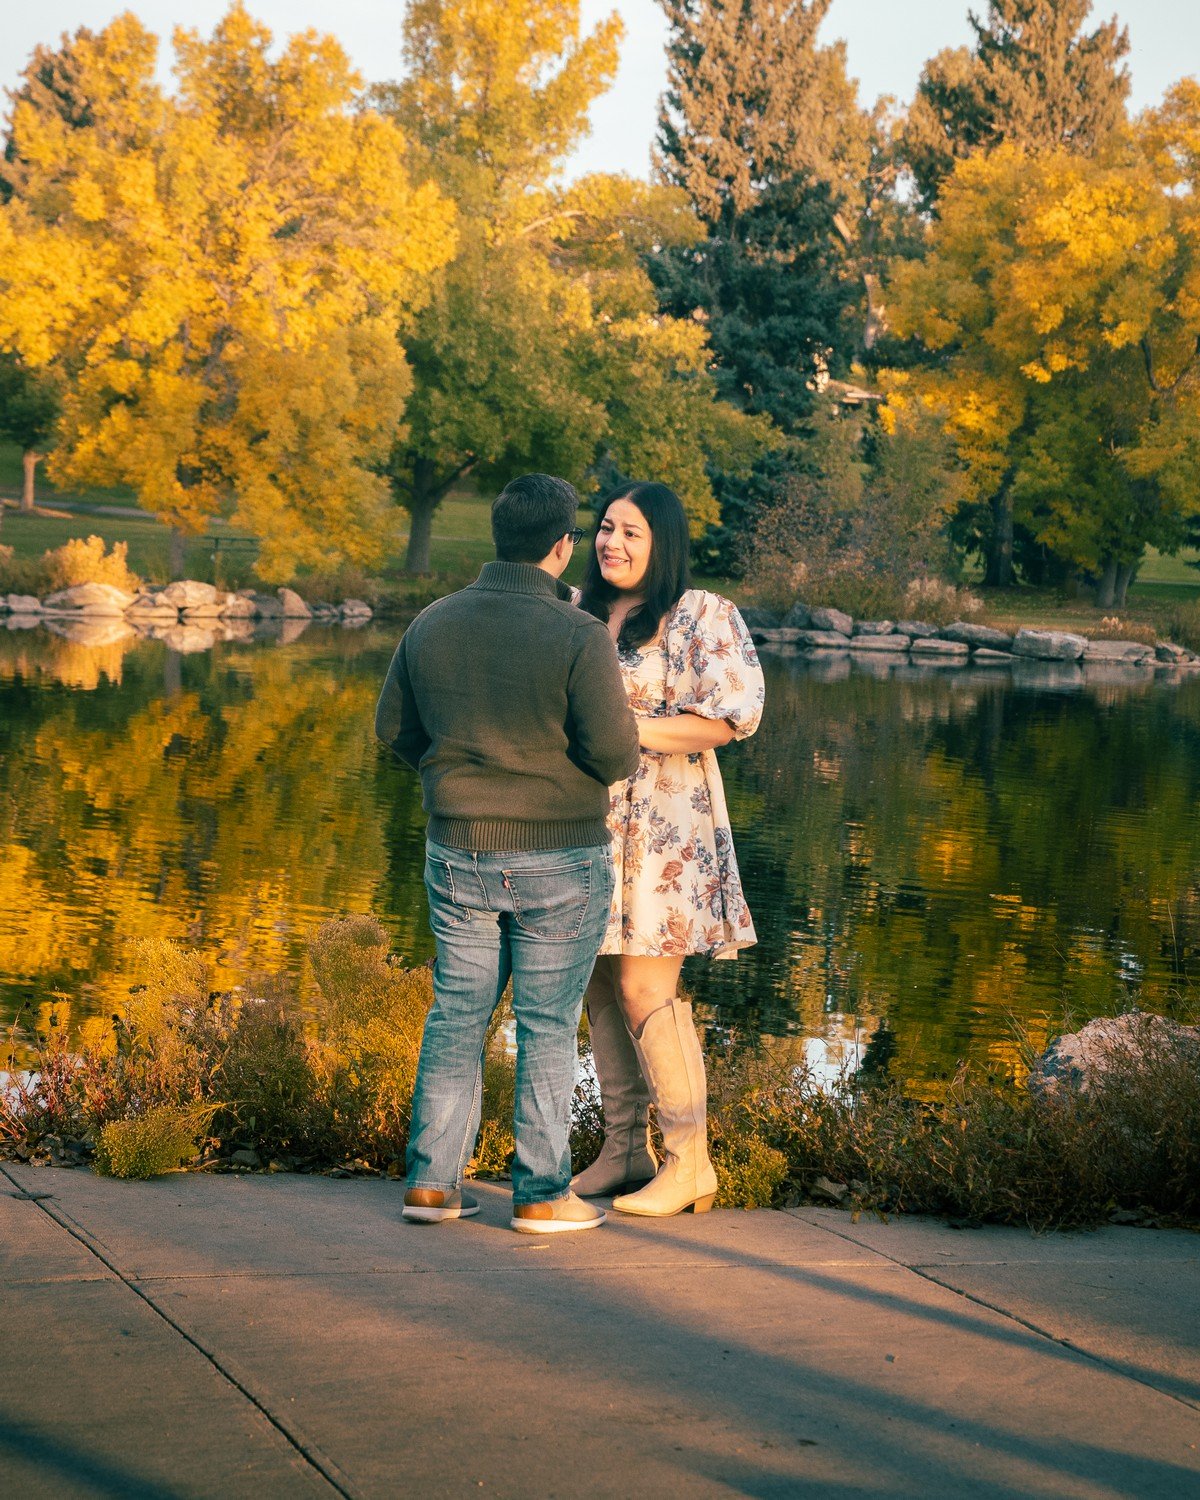 Romantic moment bertween a couple at Sterne Park.jpg